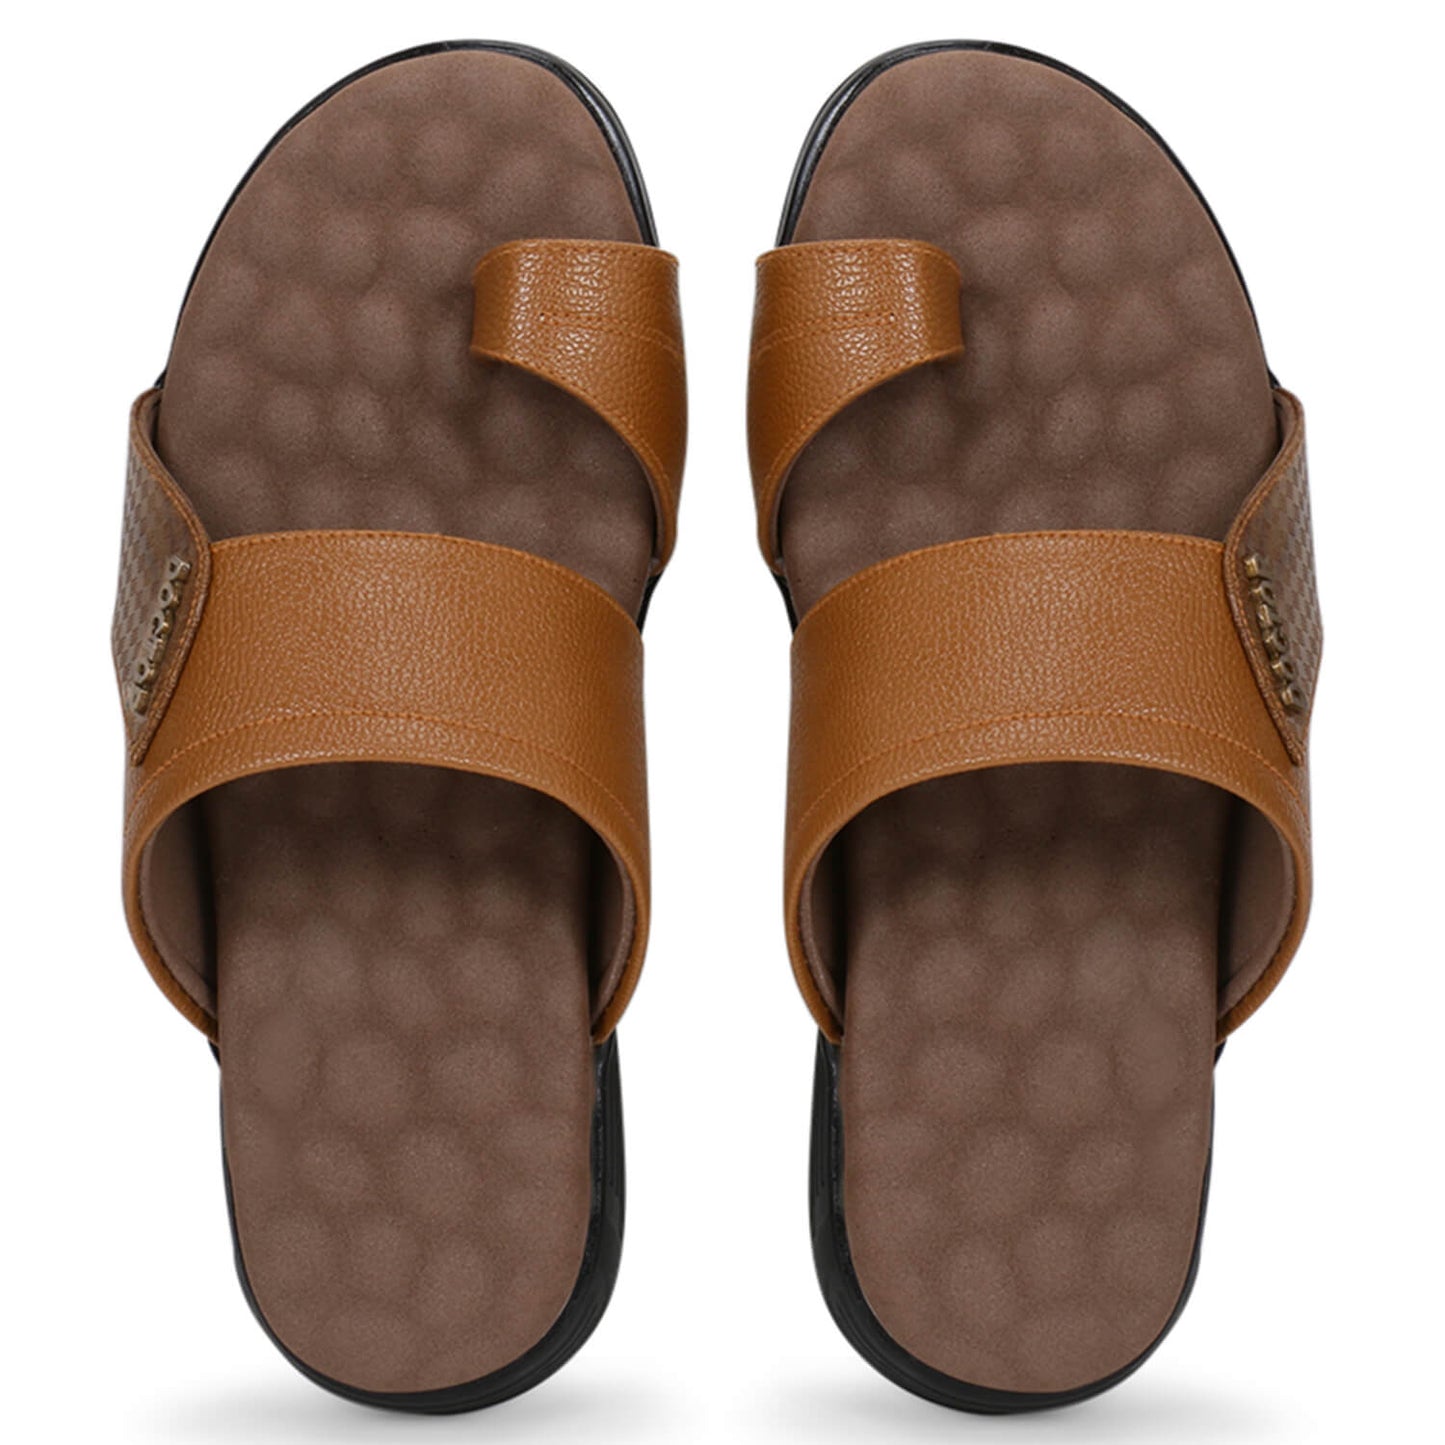 Doctor Extra Soft L-4, Anti Skid With Cushioned Footbed Skin Friendly Chappal/Sandals for Men-Gents-Boys